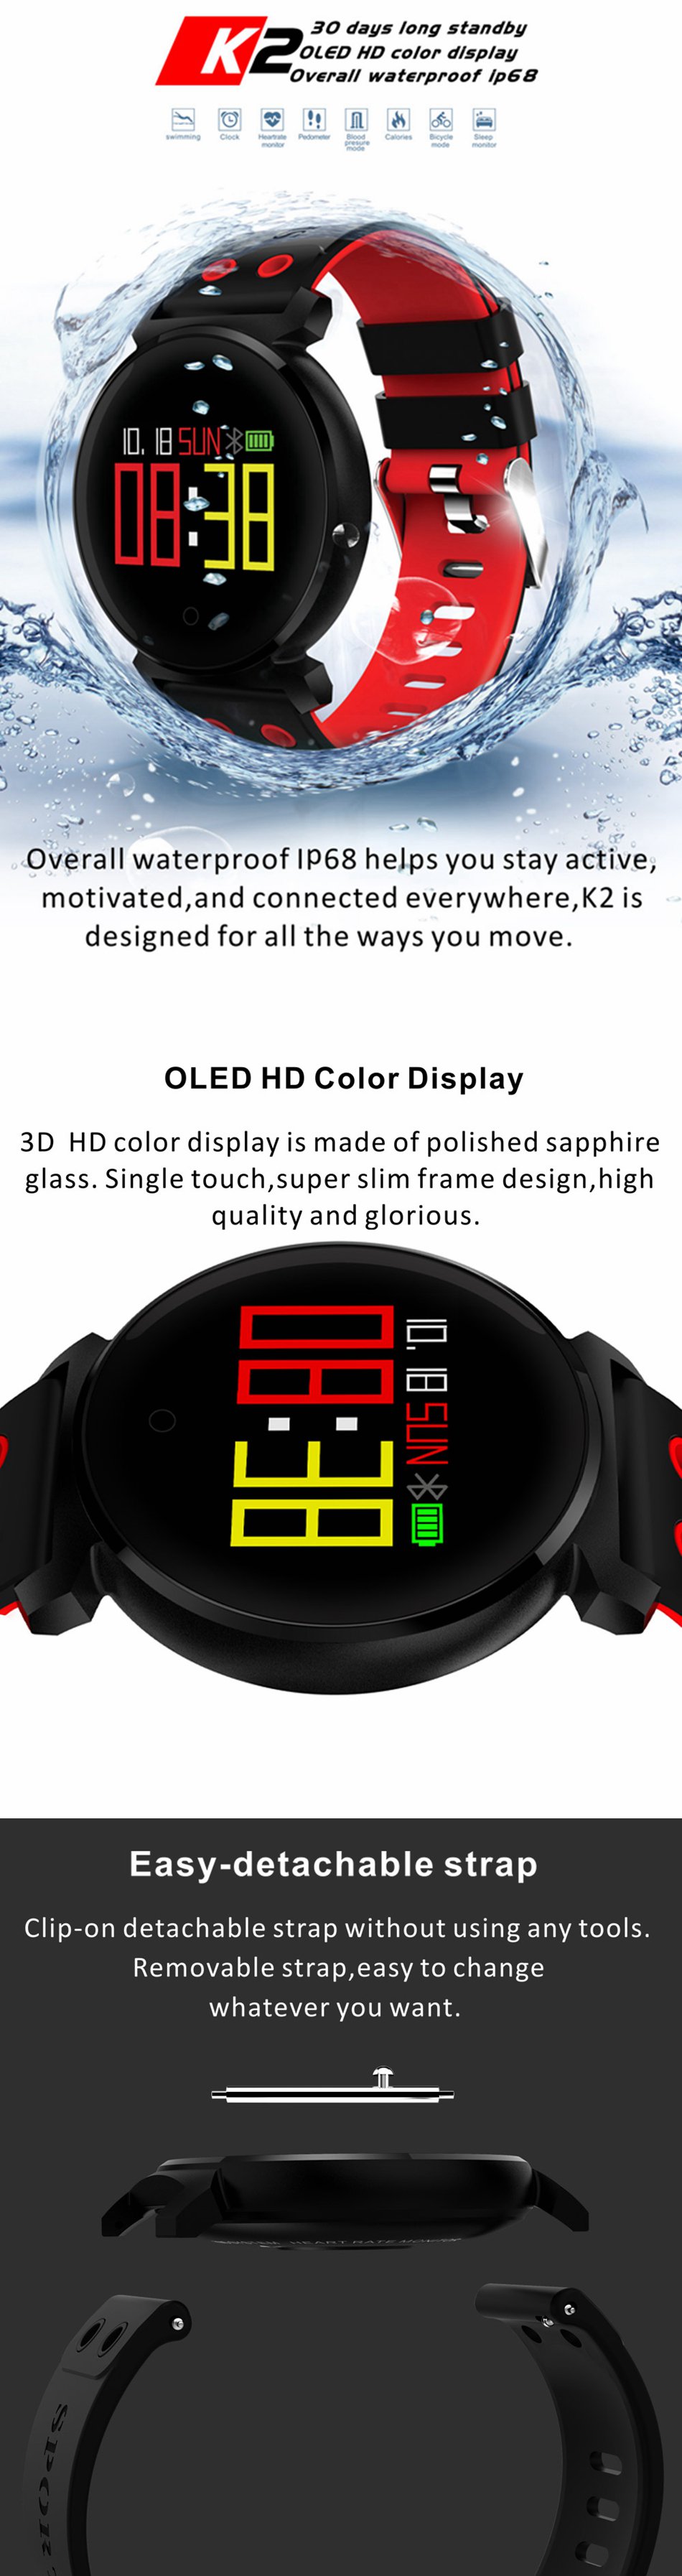 Bakeey-K2-OLED-HD-Color-Display-Swimming-Long-Stand-by-Time-Blood-Pressure-Blood-Oxygen-Monitor-Smar-1230512